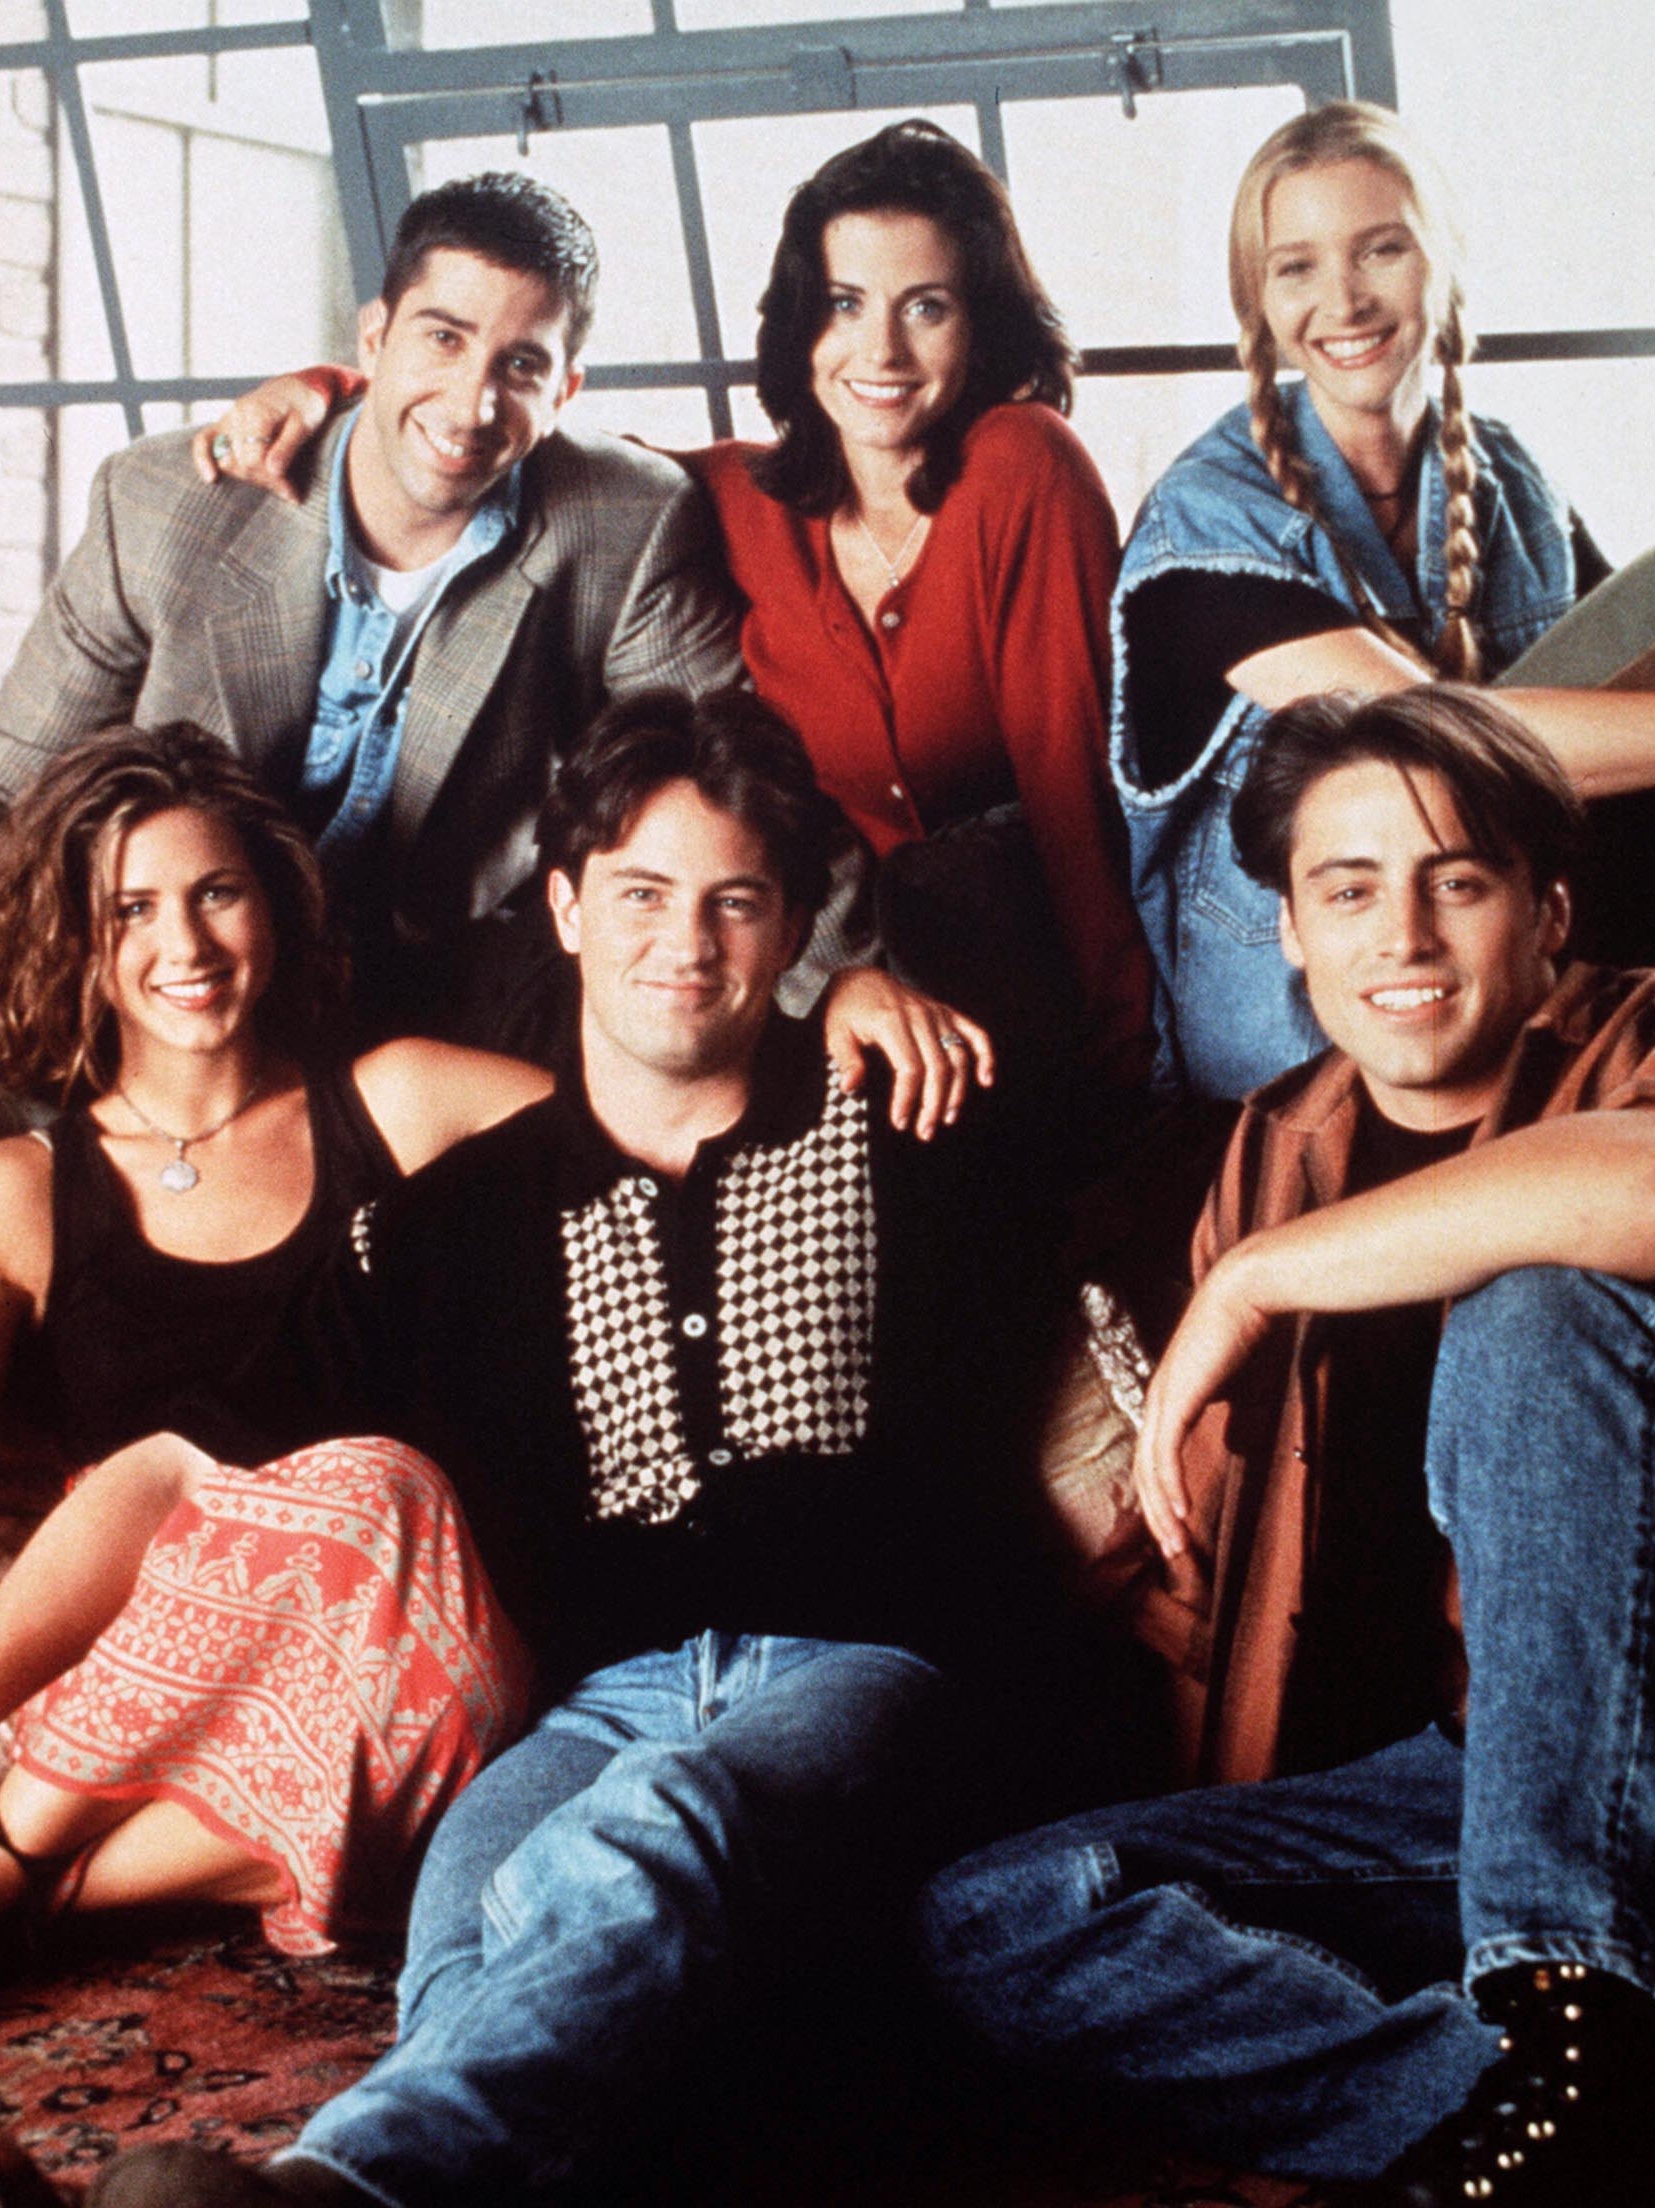 LeBlanc with the rest of the Friends cast